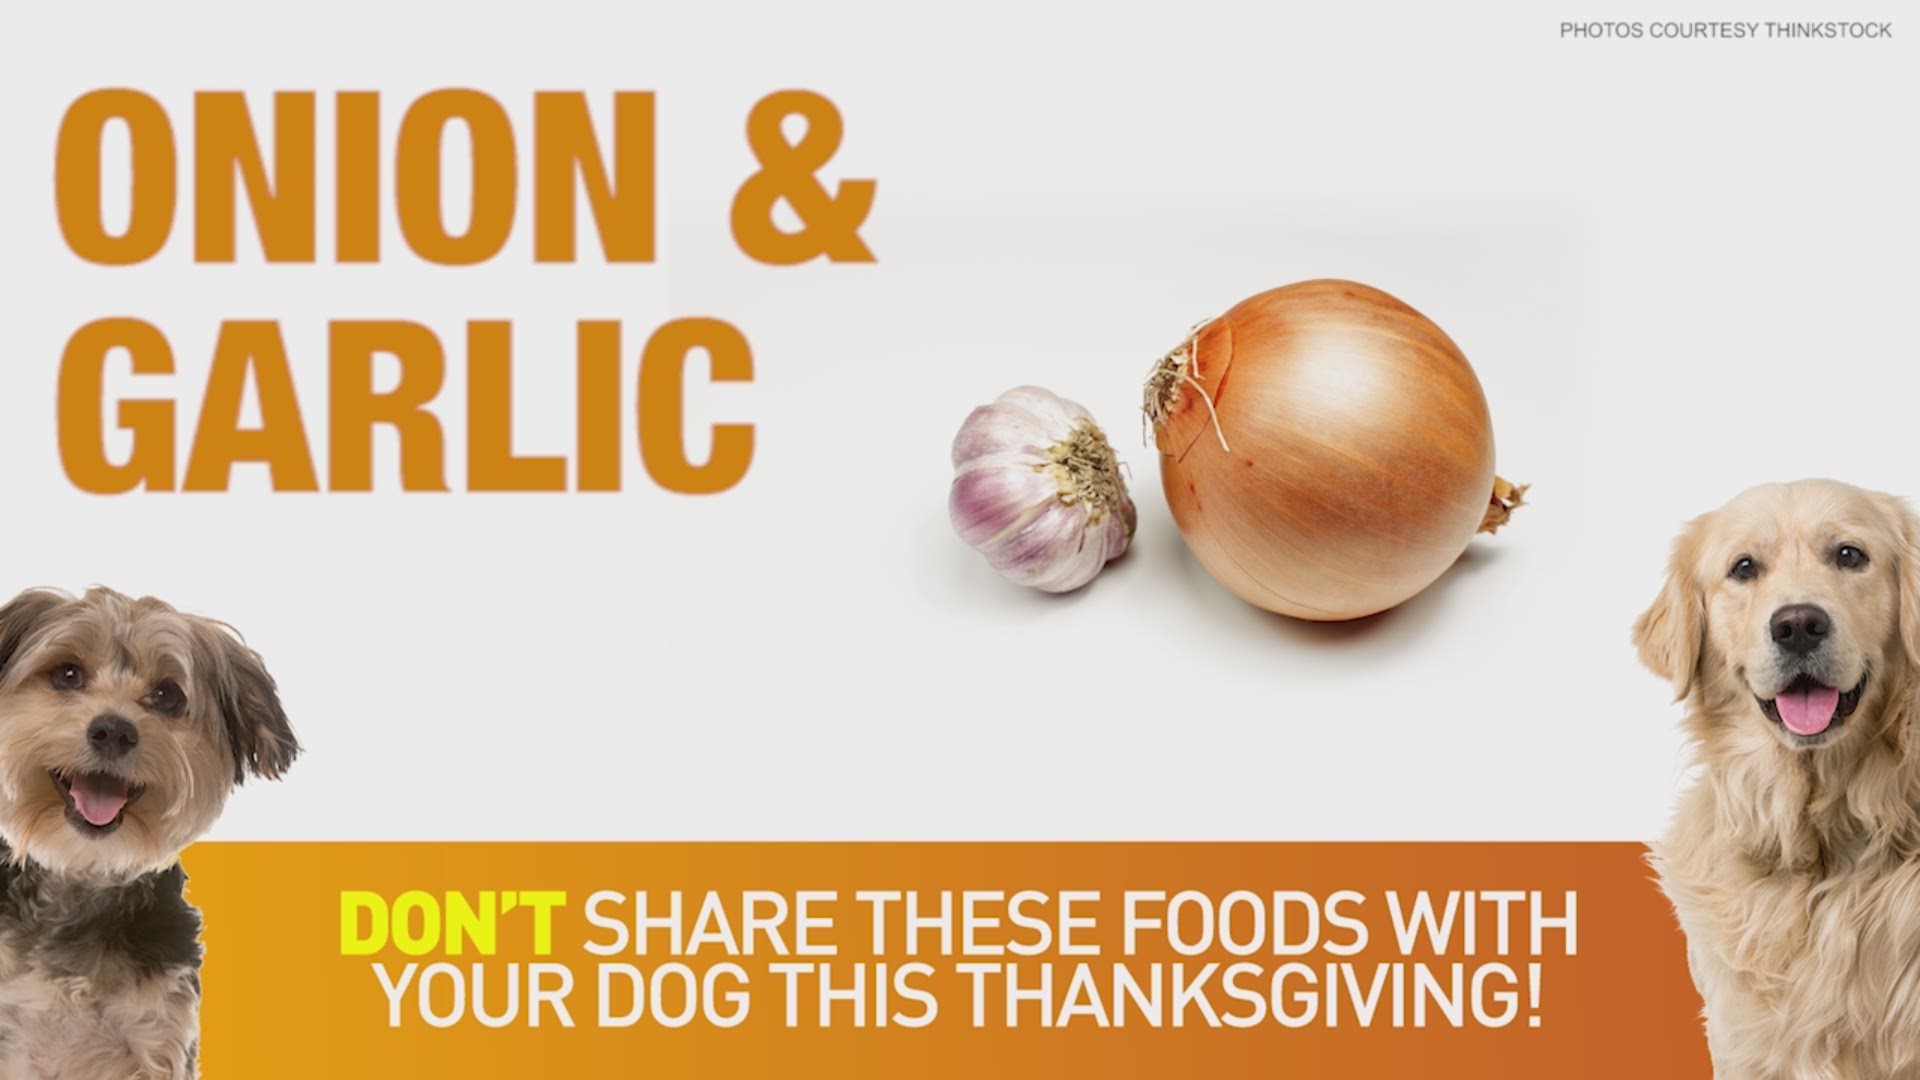 Don't feed your dogs these foods during the holiday season.